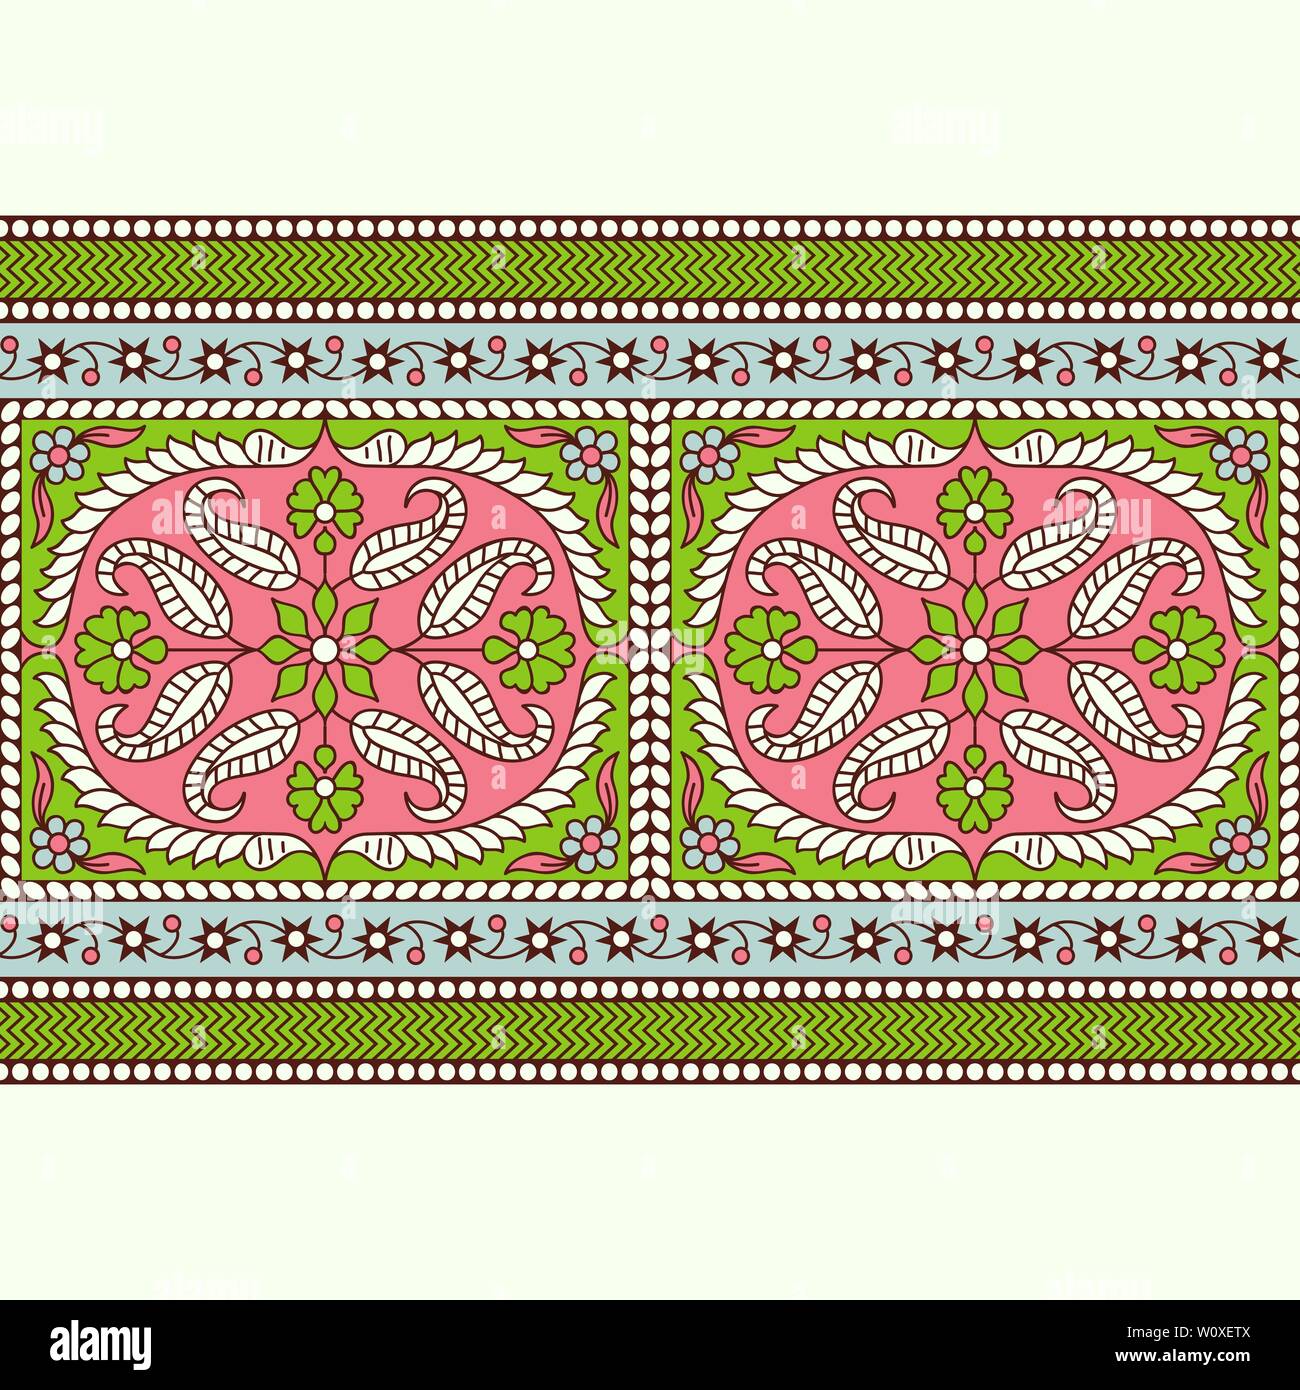 Woodblock printed seamless ethnic floral border. Traditional oriental ornament of India, kaleidoscope motif, green, pink and blue tones on ecru. Stock Vector